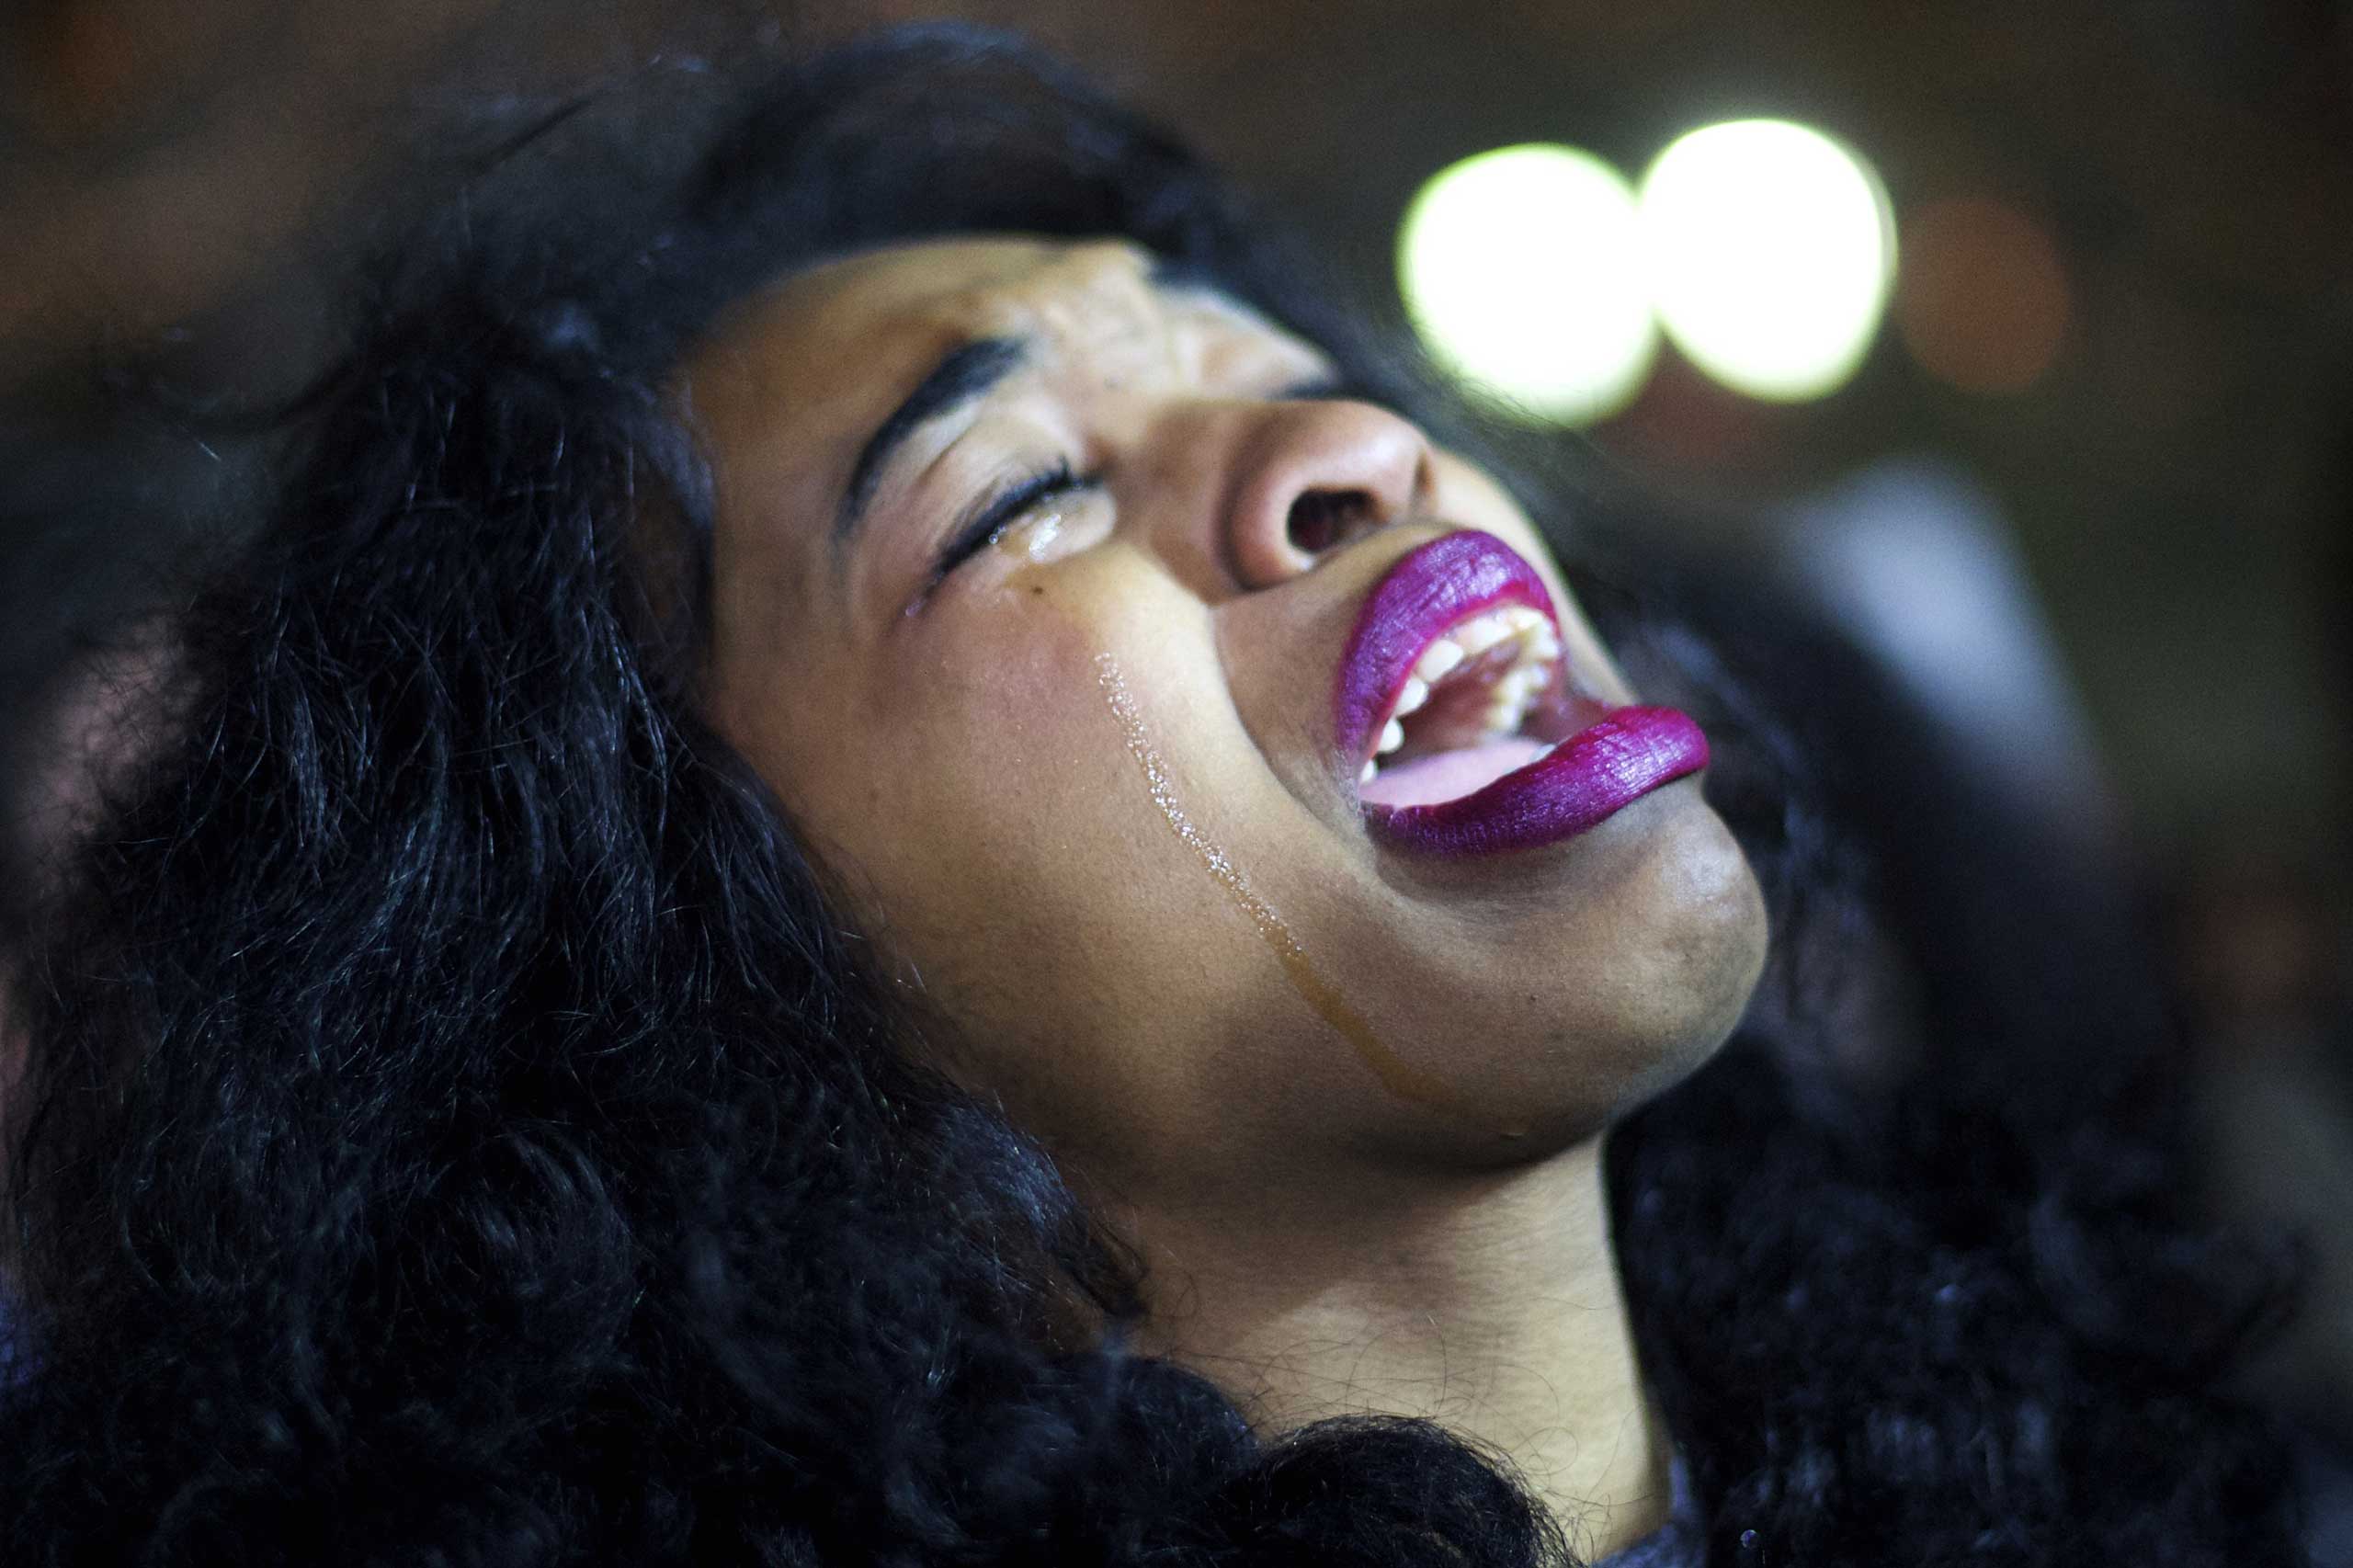 A demonstrator cries while gathering to protest the Eric Garner grand jury decision during a Christmas Tree lighting ceremony at City Hall in Philadelphia on Dec. 3, 2014.